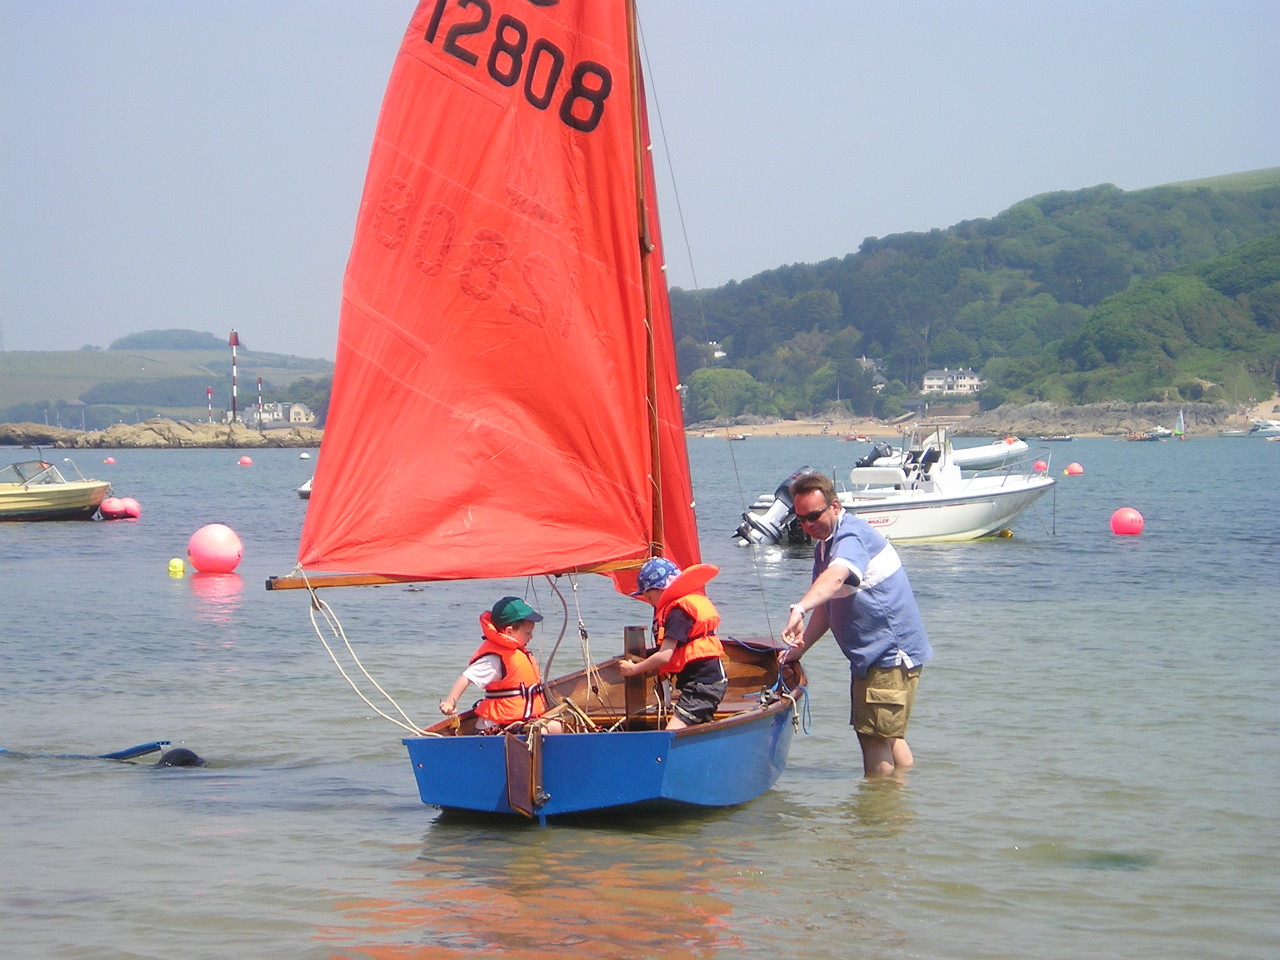 A blue wooden Mirror dinghy, with two small children aboard, getting ready to set sail